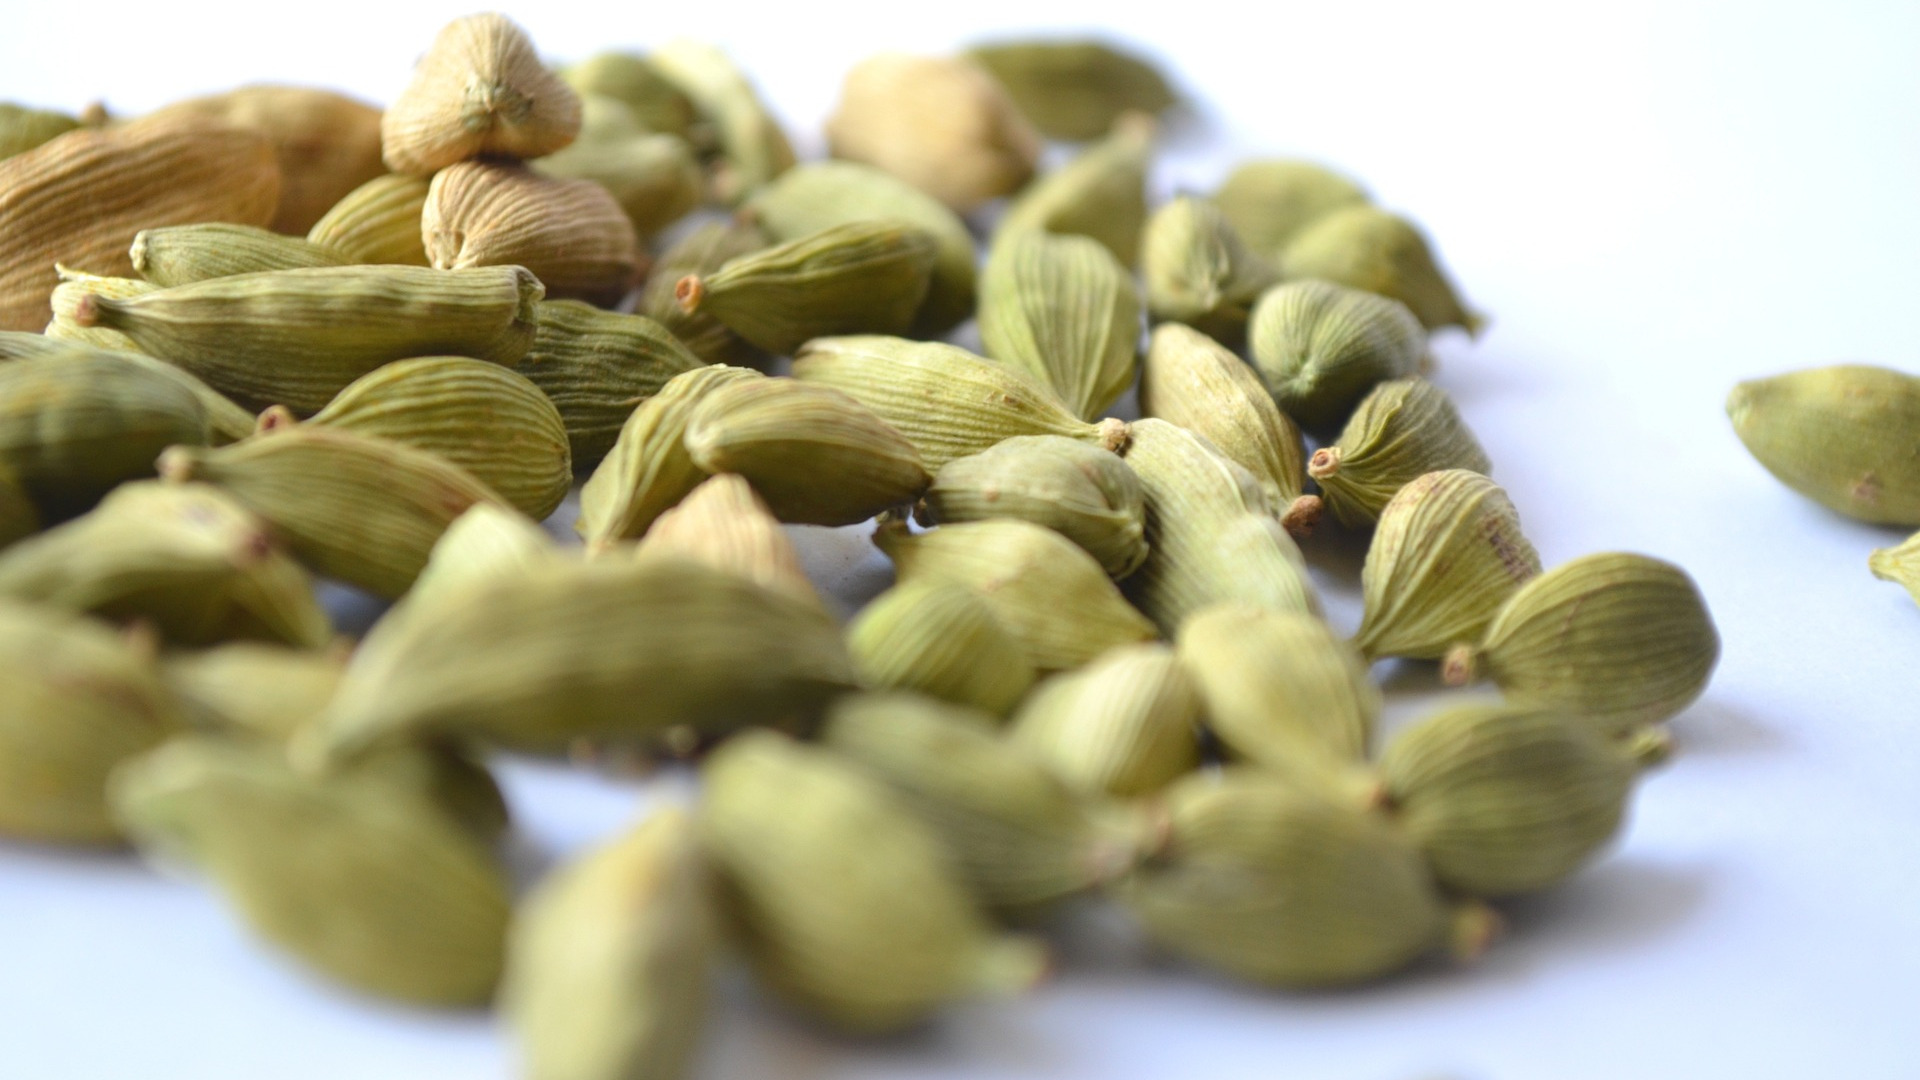 Cardamom Seed Pods are used to make Cardamom Essential Oil